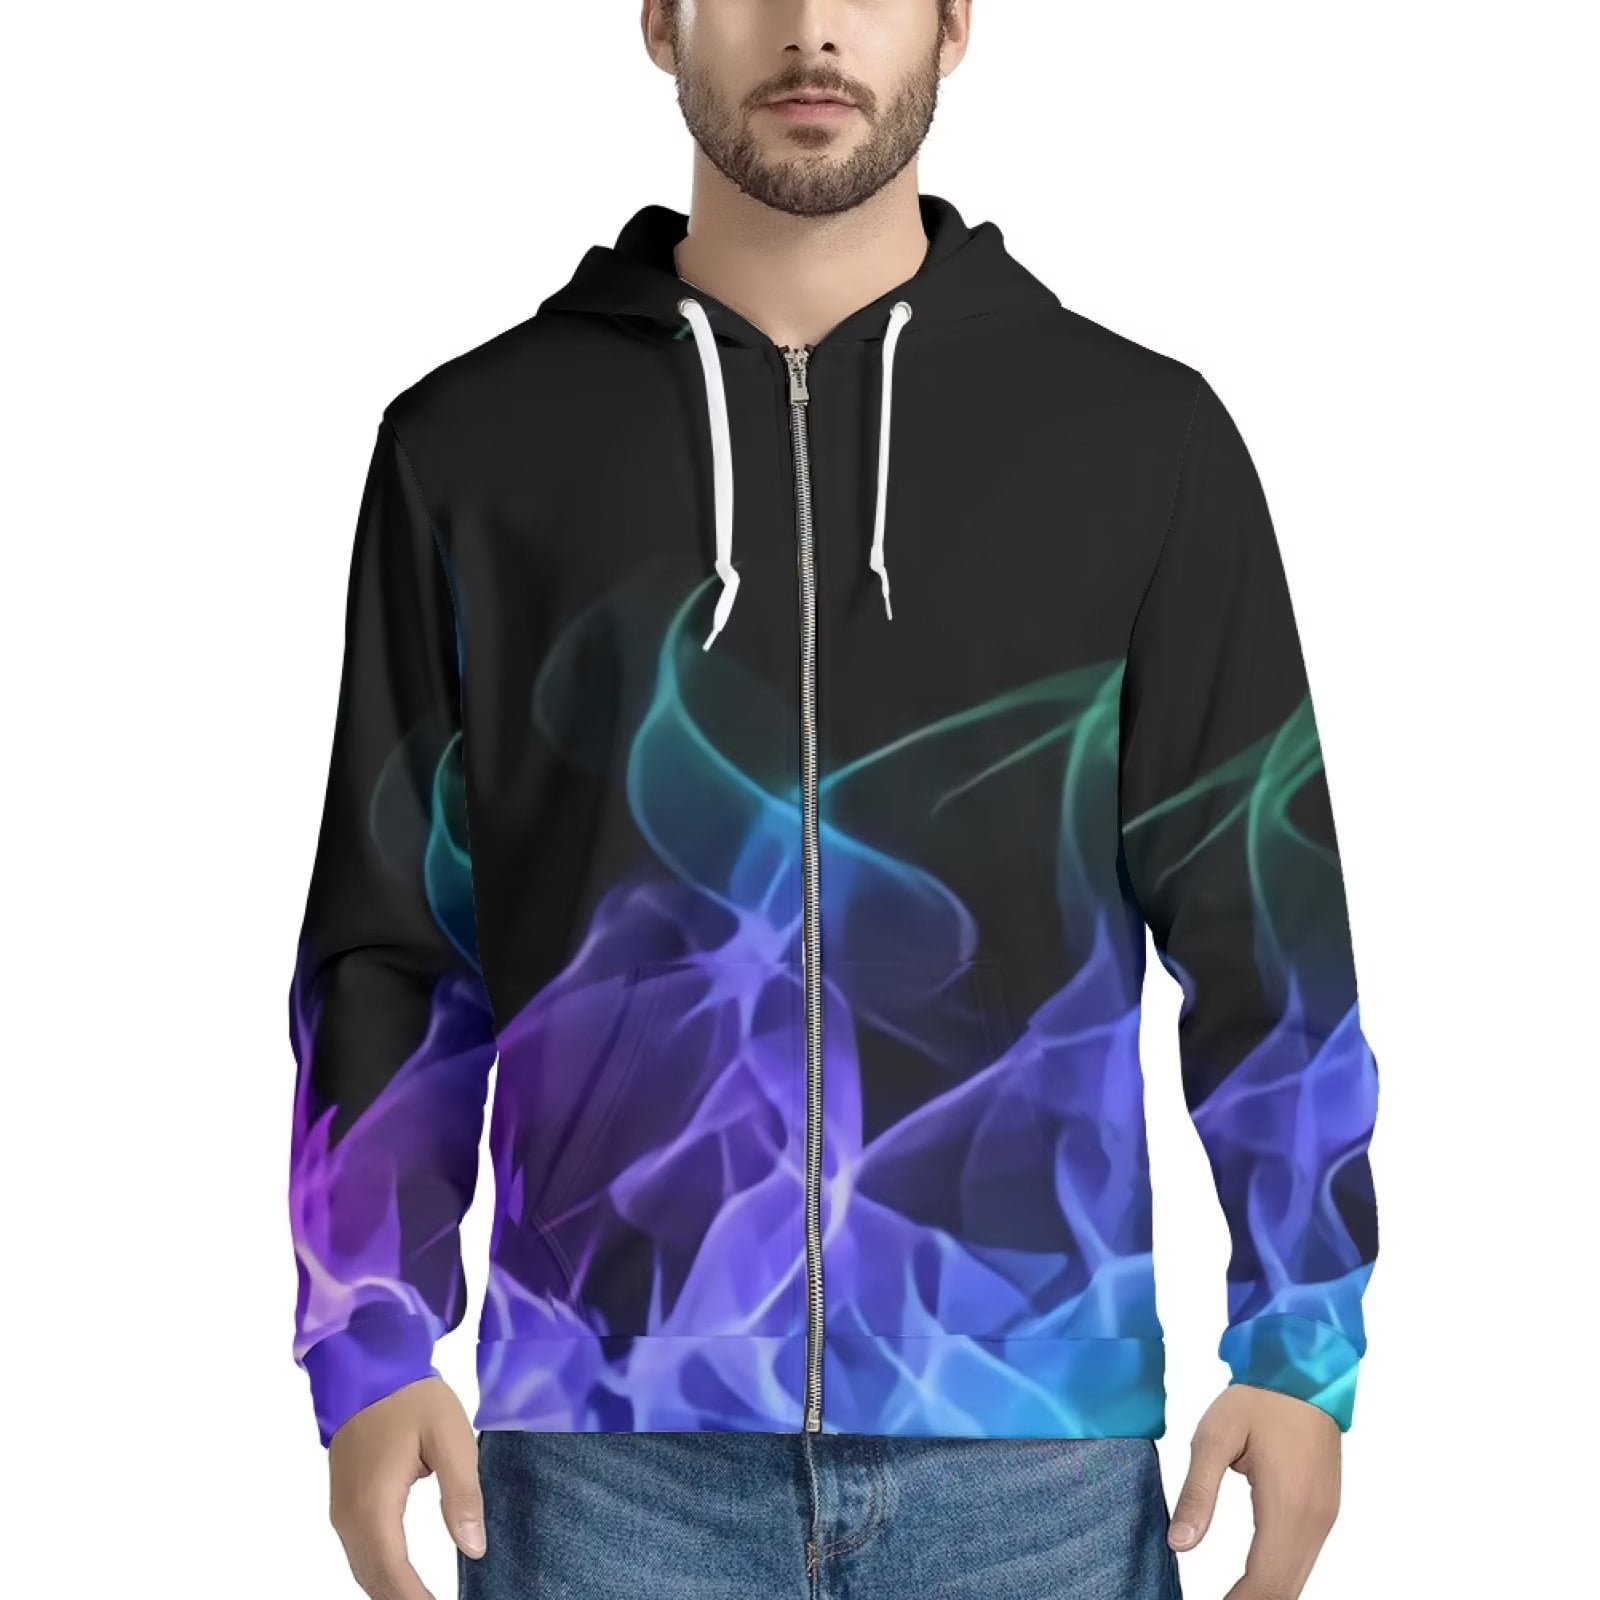 Suhoaziia Black Zip Up Hoodies for Men Graphic Novelty Purple Flame Graphic  Print Clothes Fall Soft Breathable Daily Life Jersey with Pocket Size 4XL